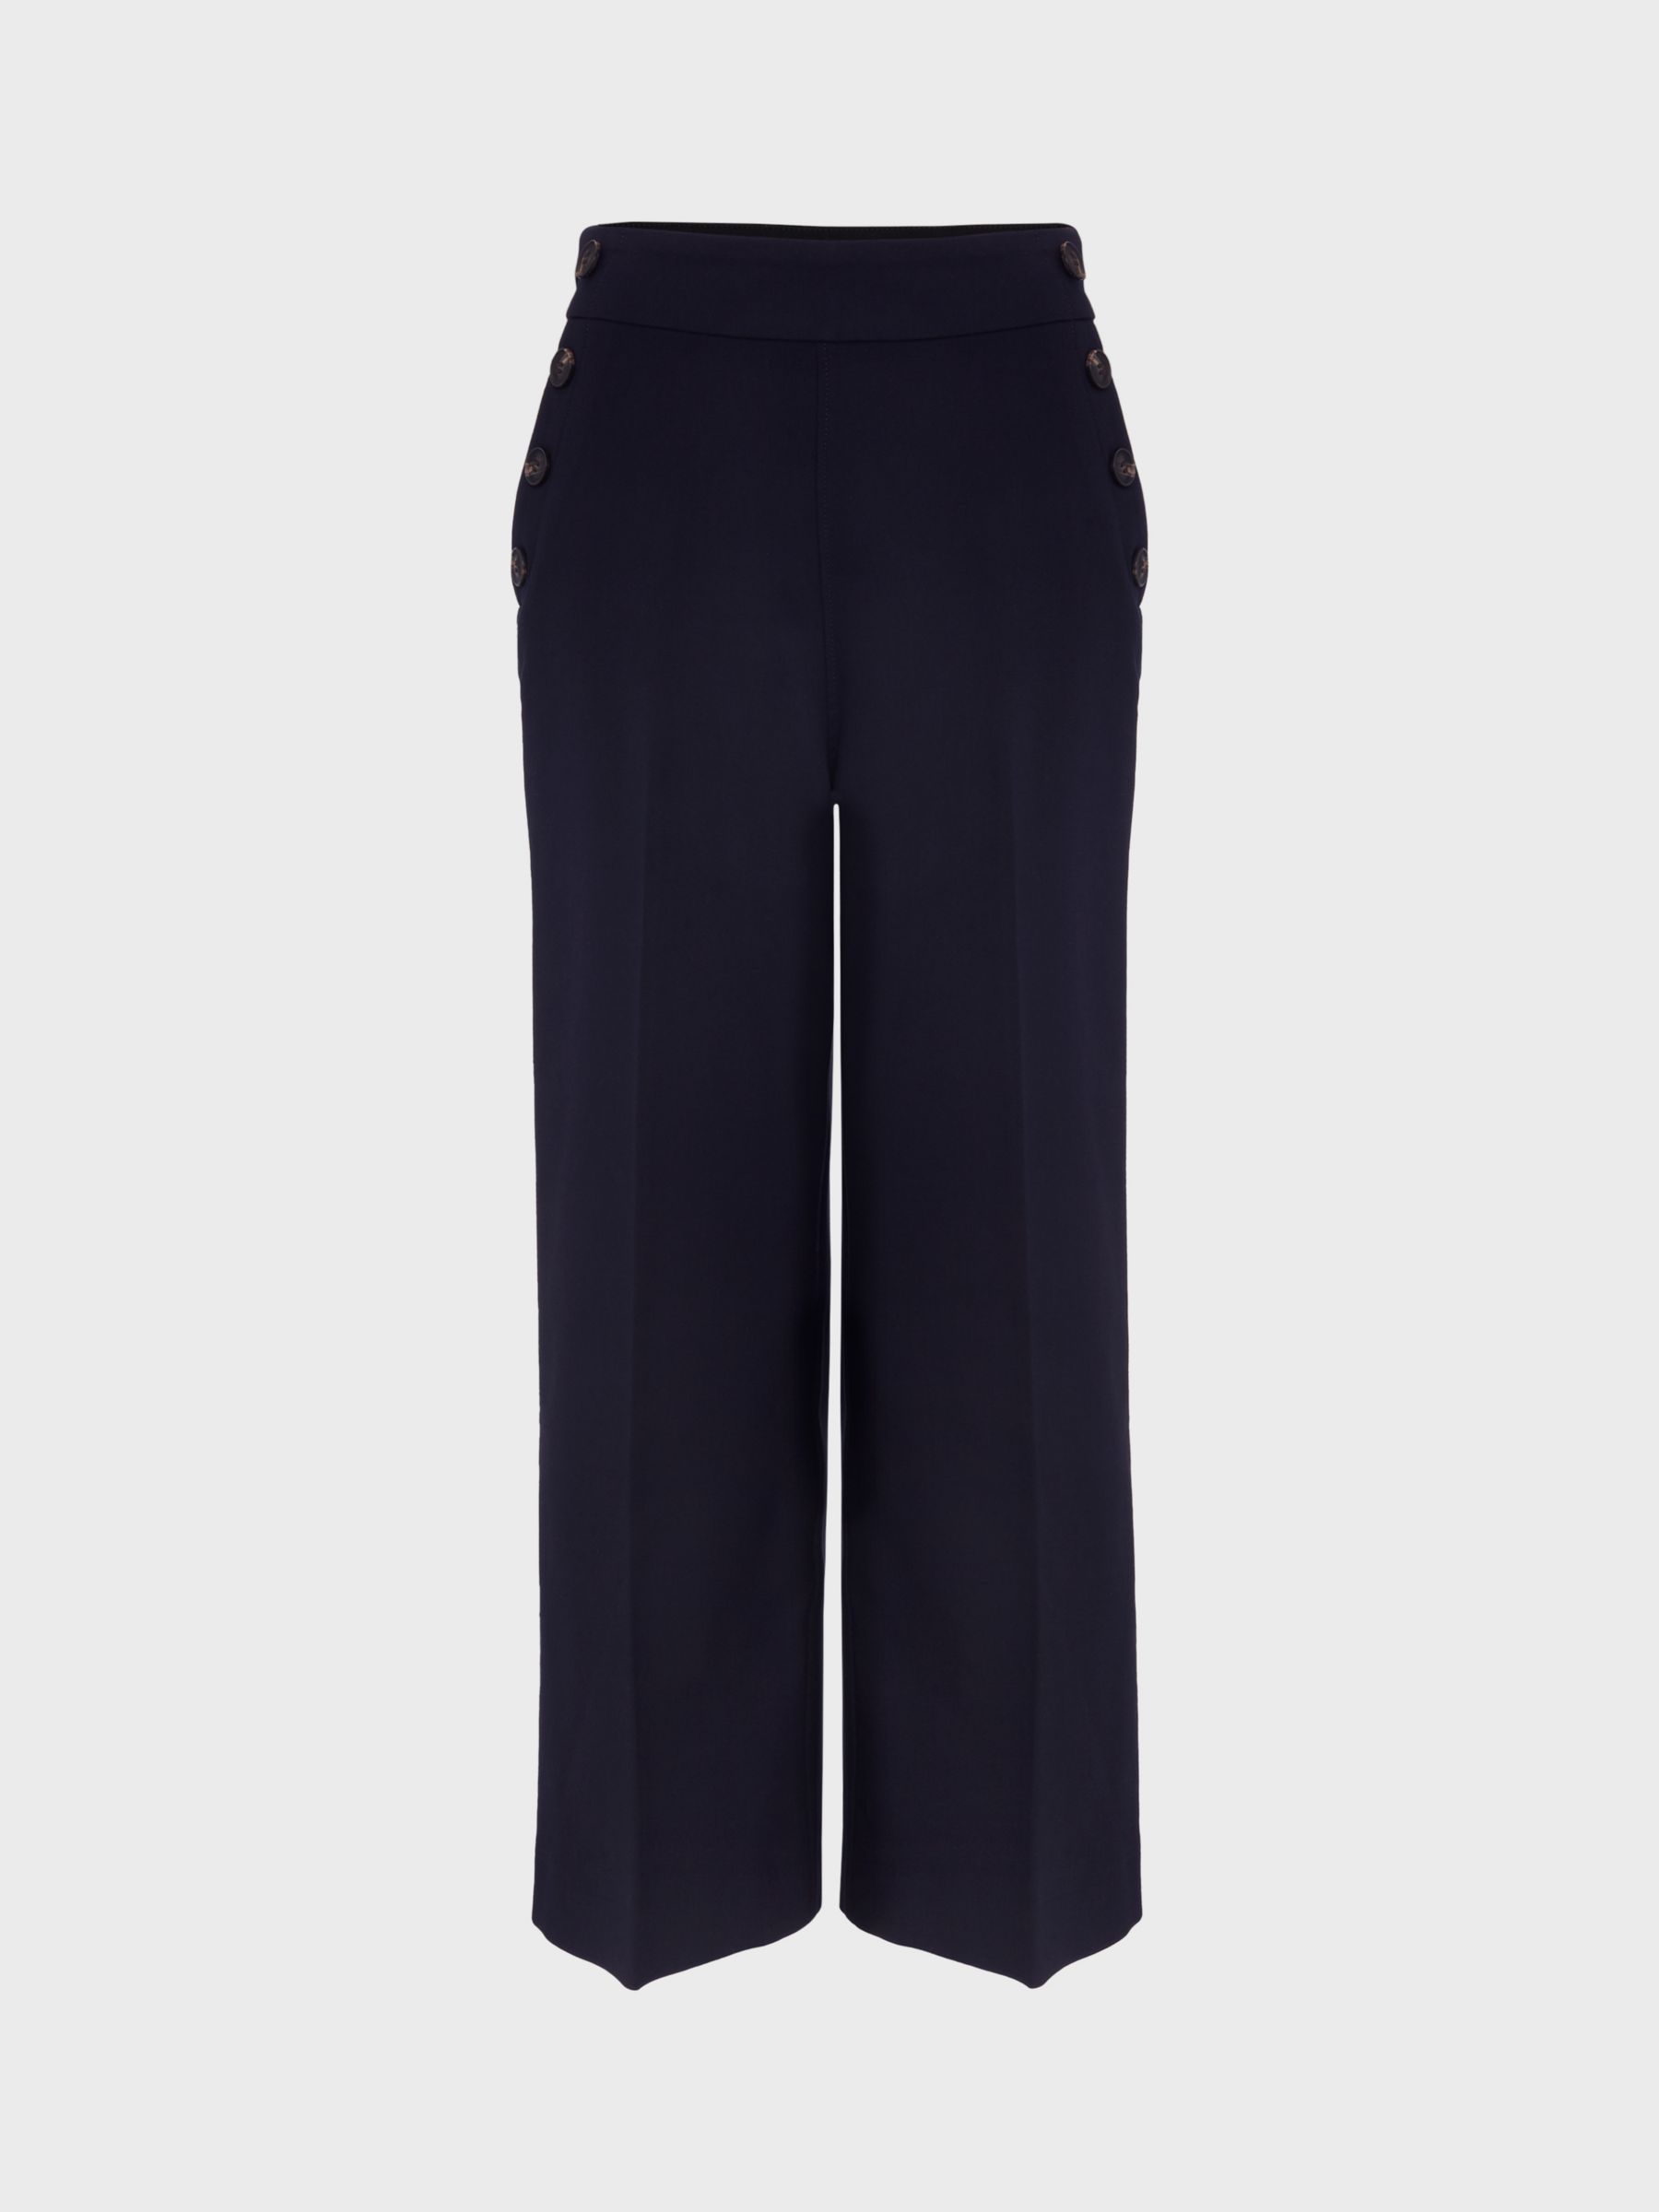 Hobbs Simone Cropped Trousers, Navy, 10